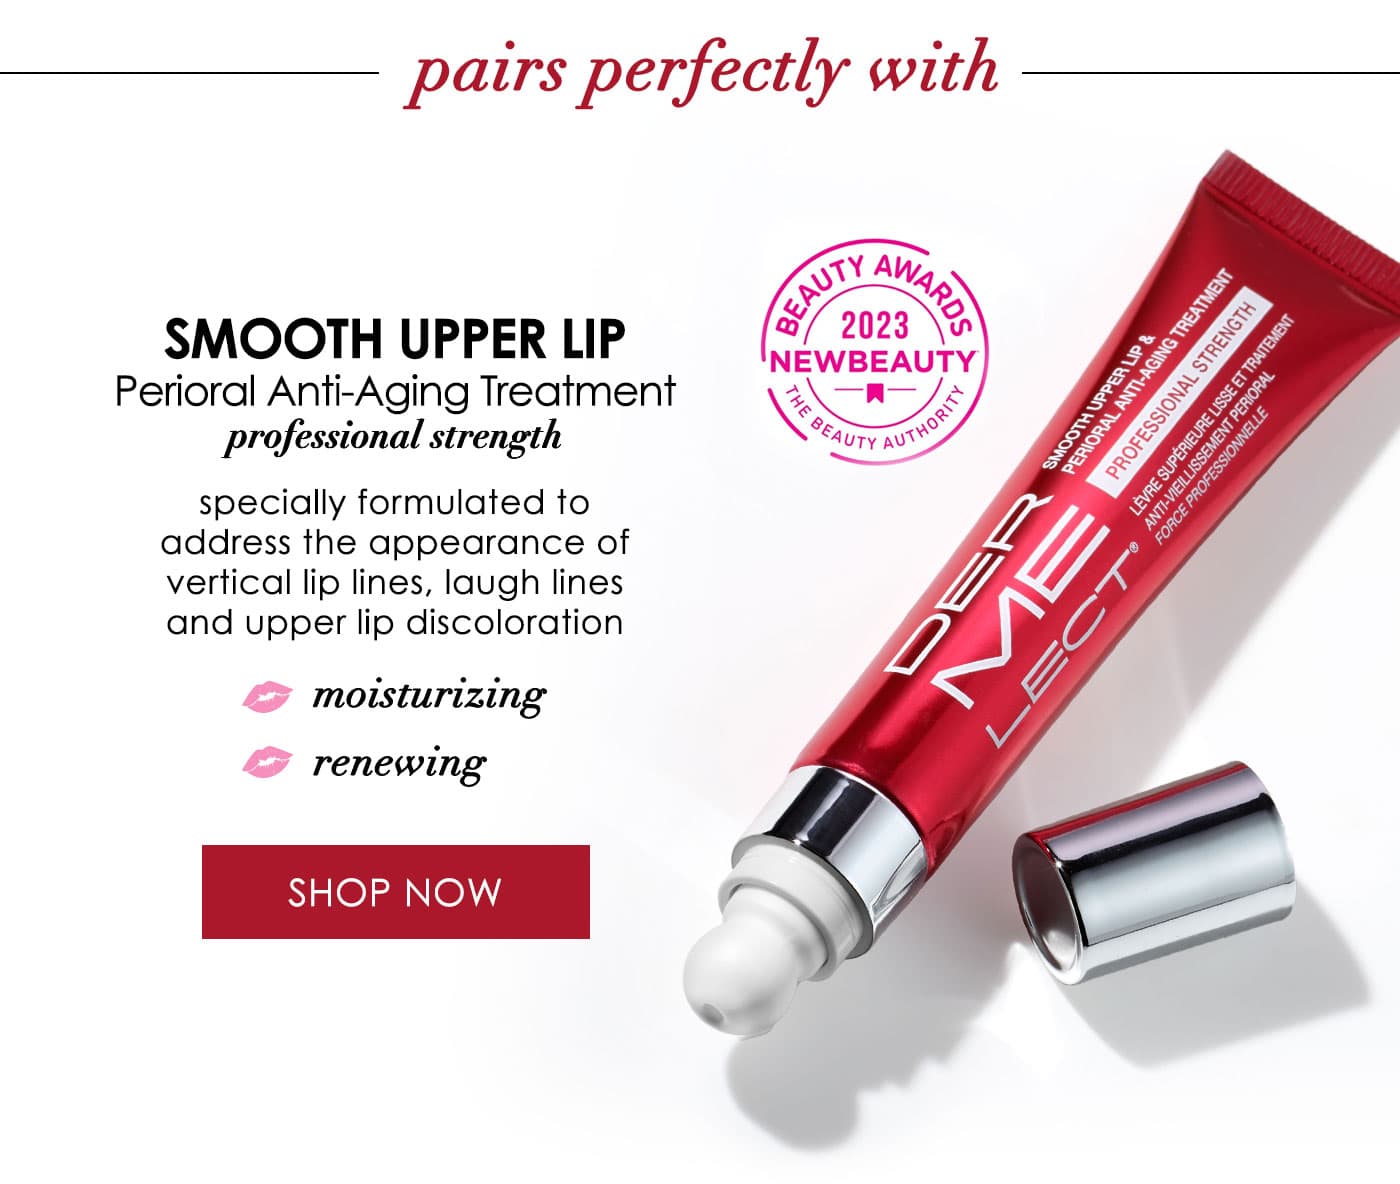 SMOOTH UPPER LIP PROFESSIONAL Perioral Anti-Aging Treatment professional strength